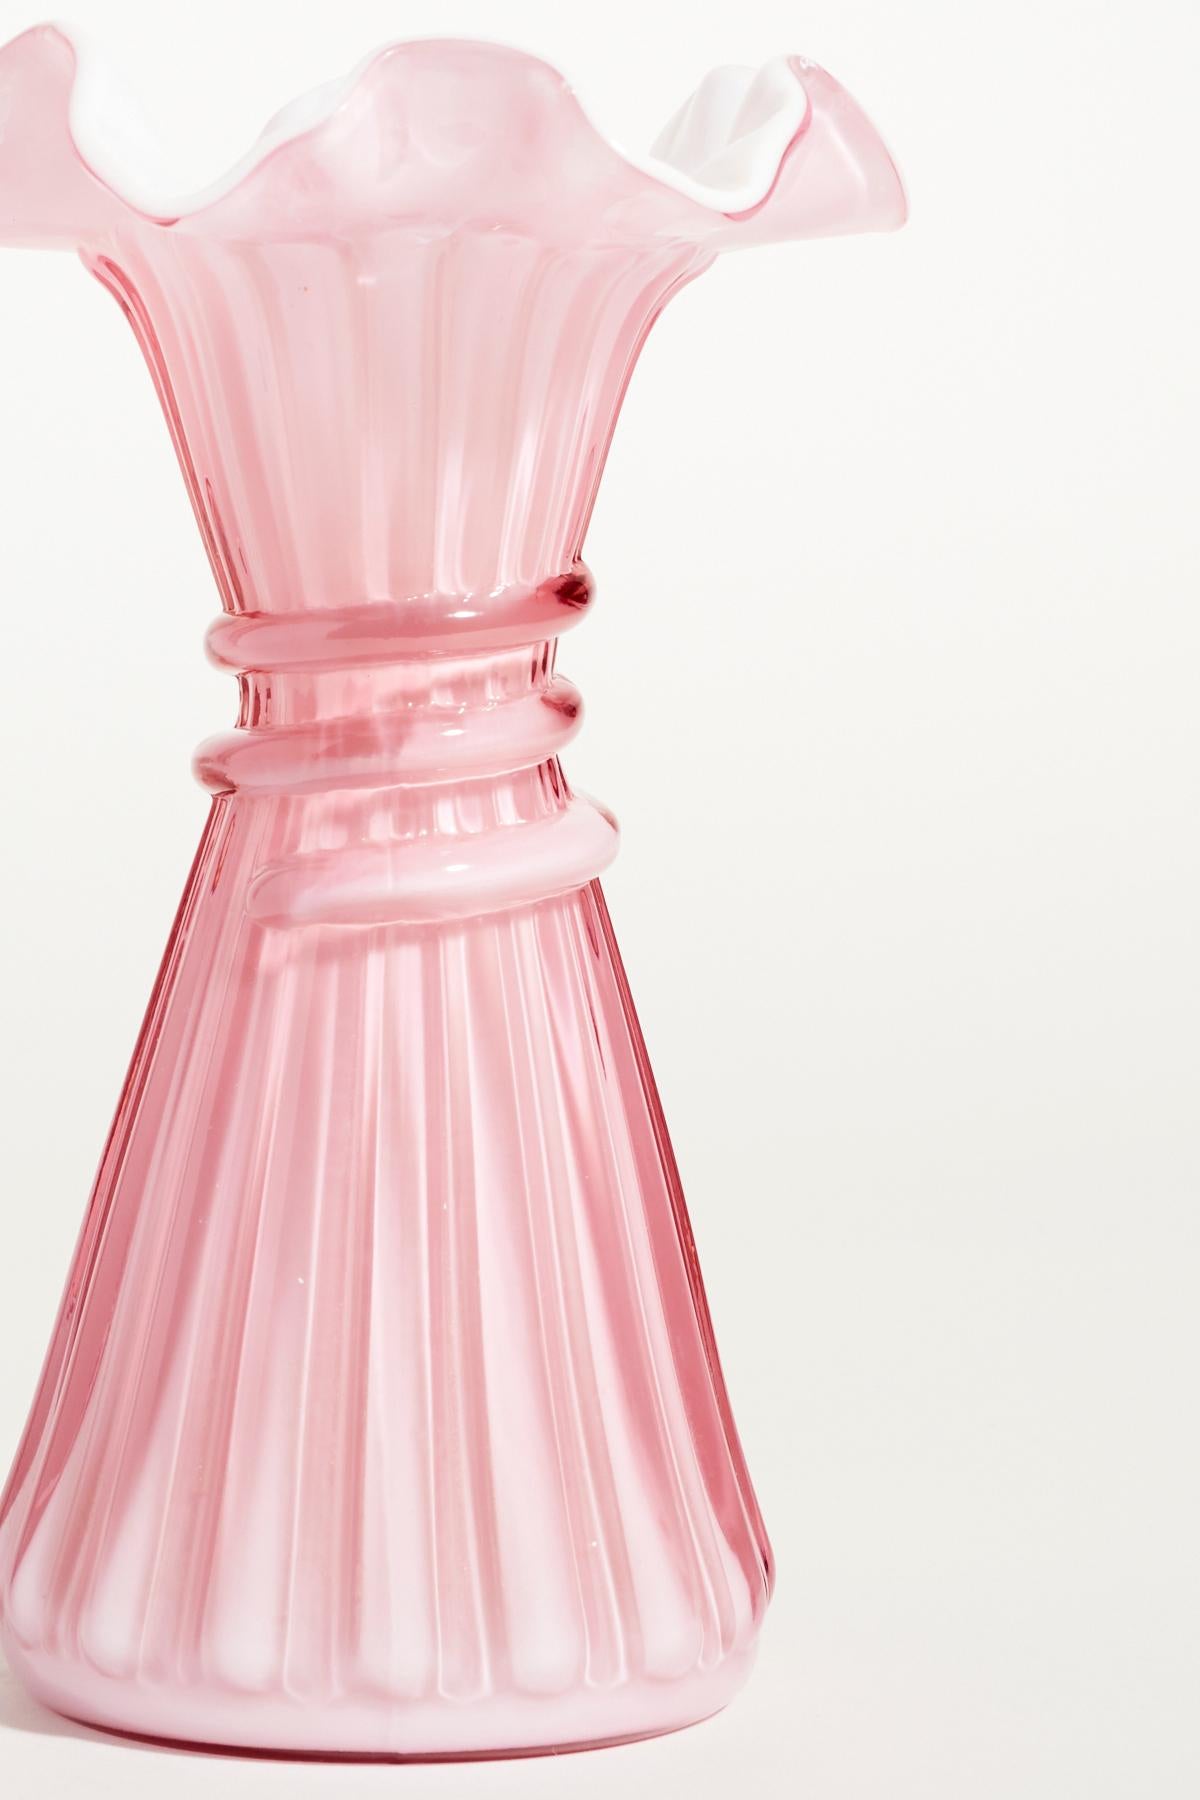 Mid-20th Century Tea Rose Pink and White Vase